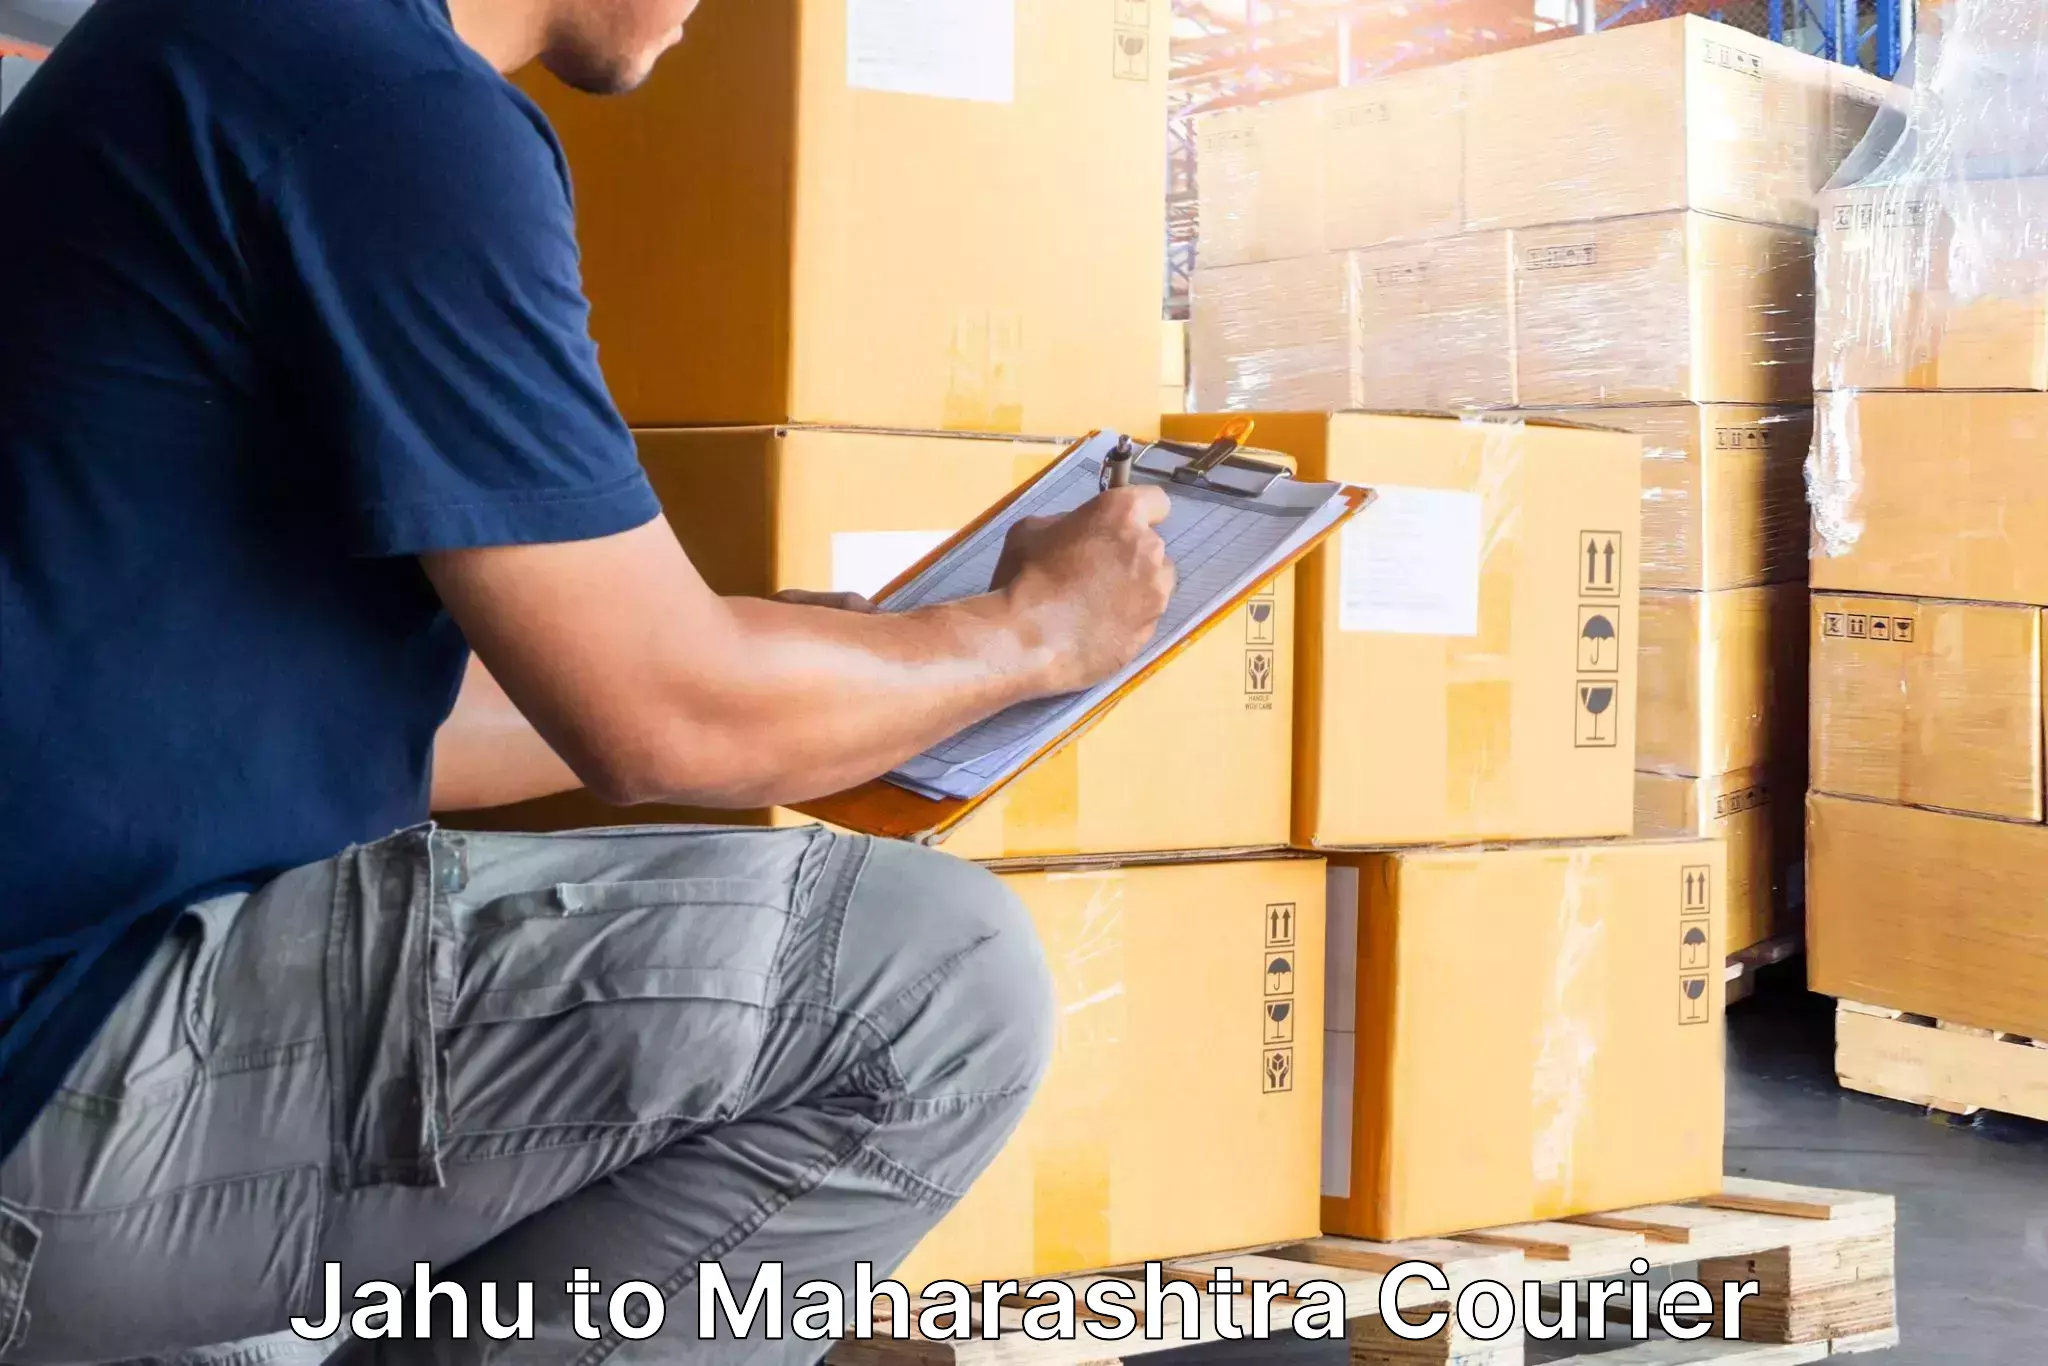 Dependable furniture movers Jahu to Ahmednagar